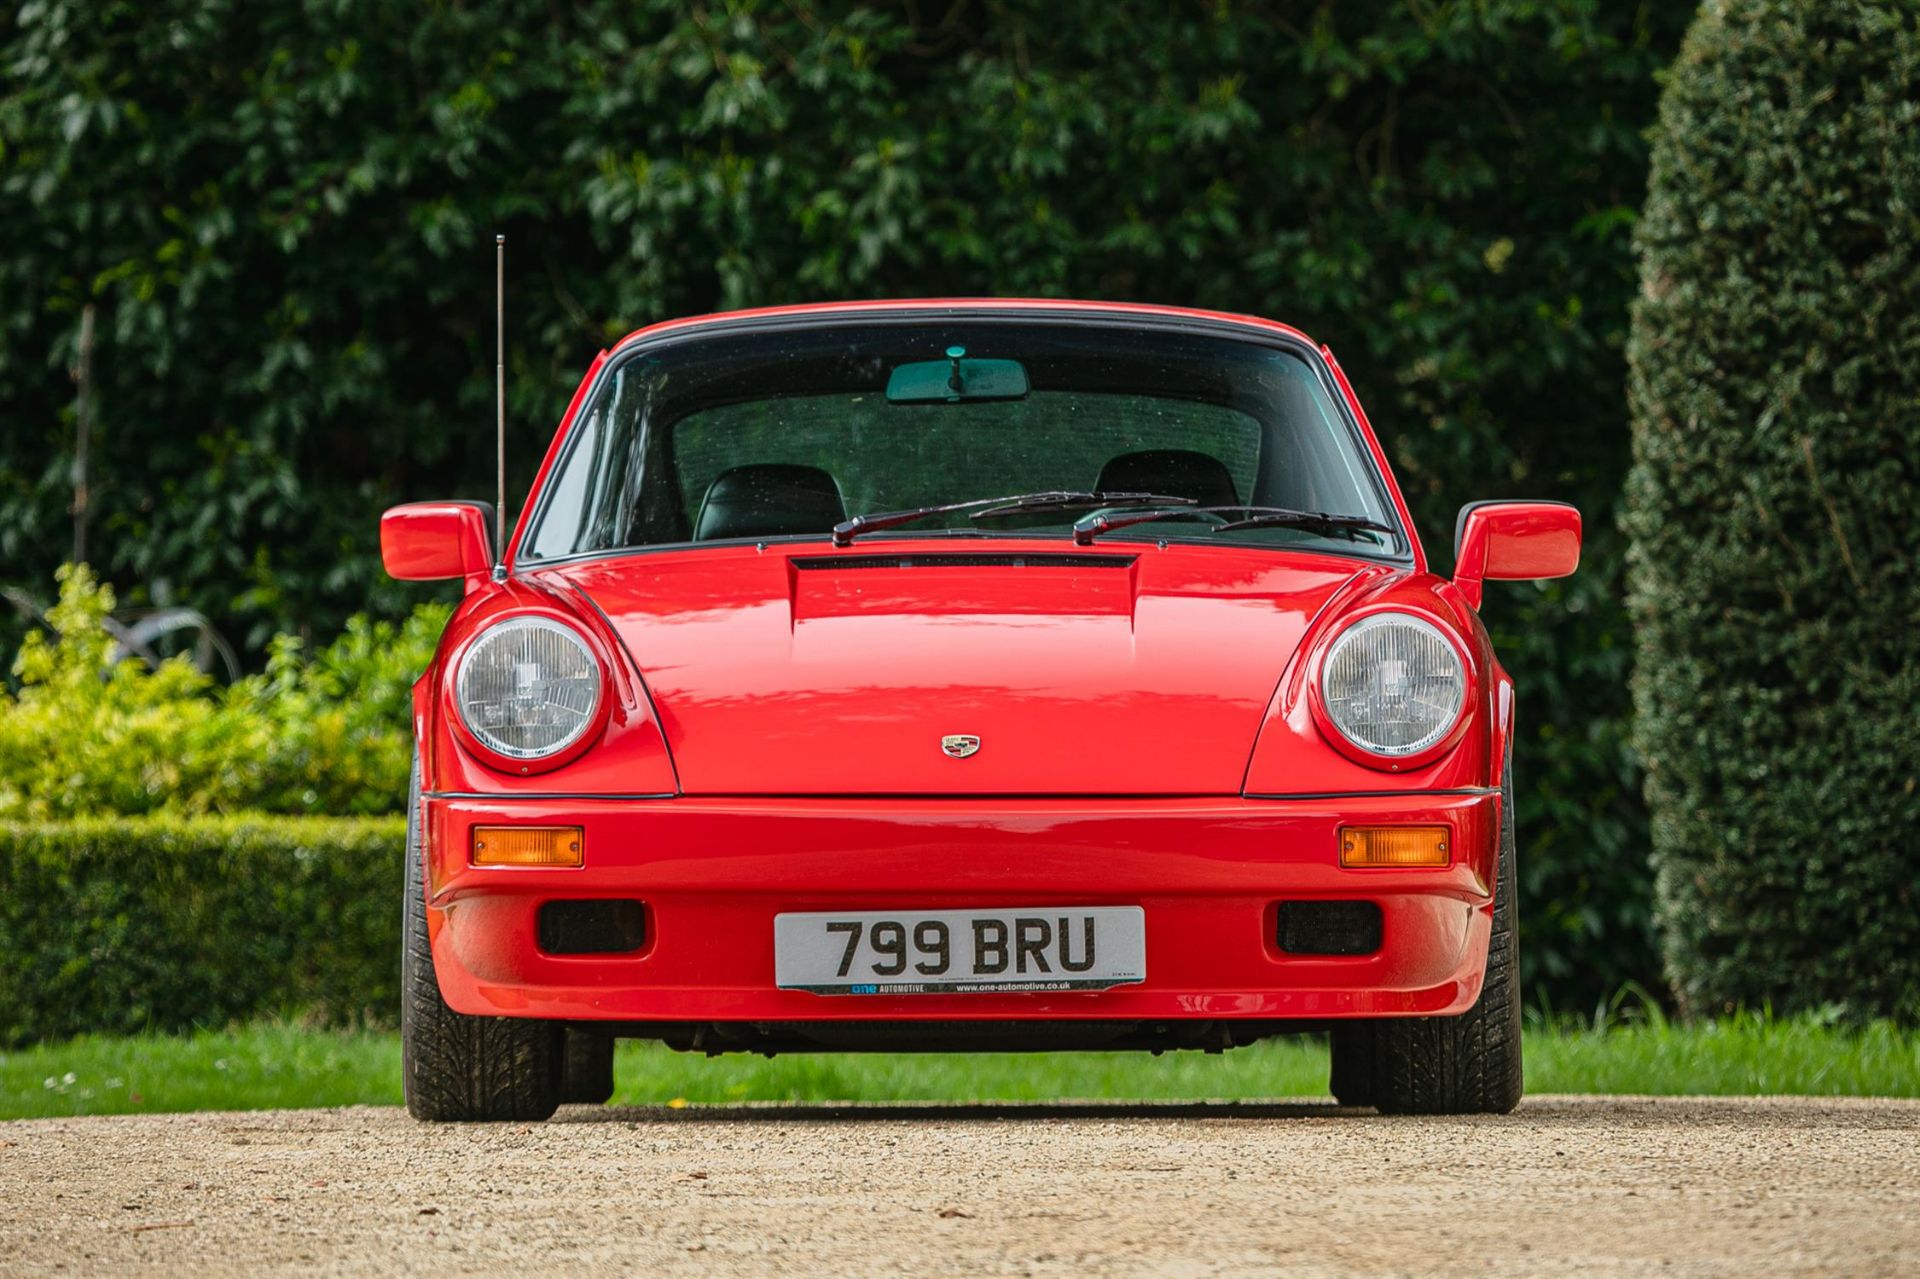 **Sold Pre-Sale**1982 Porsche 911 SC Restomod - Offered Directly From Mike Brewer - Image 6 of 10